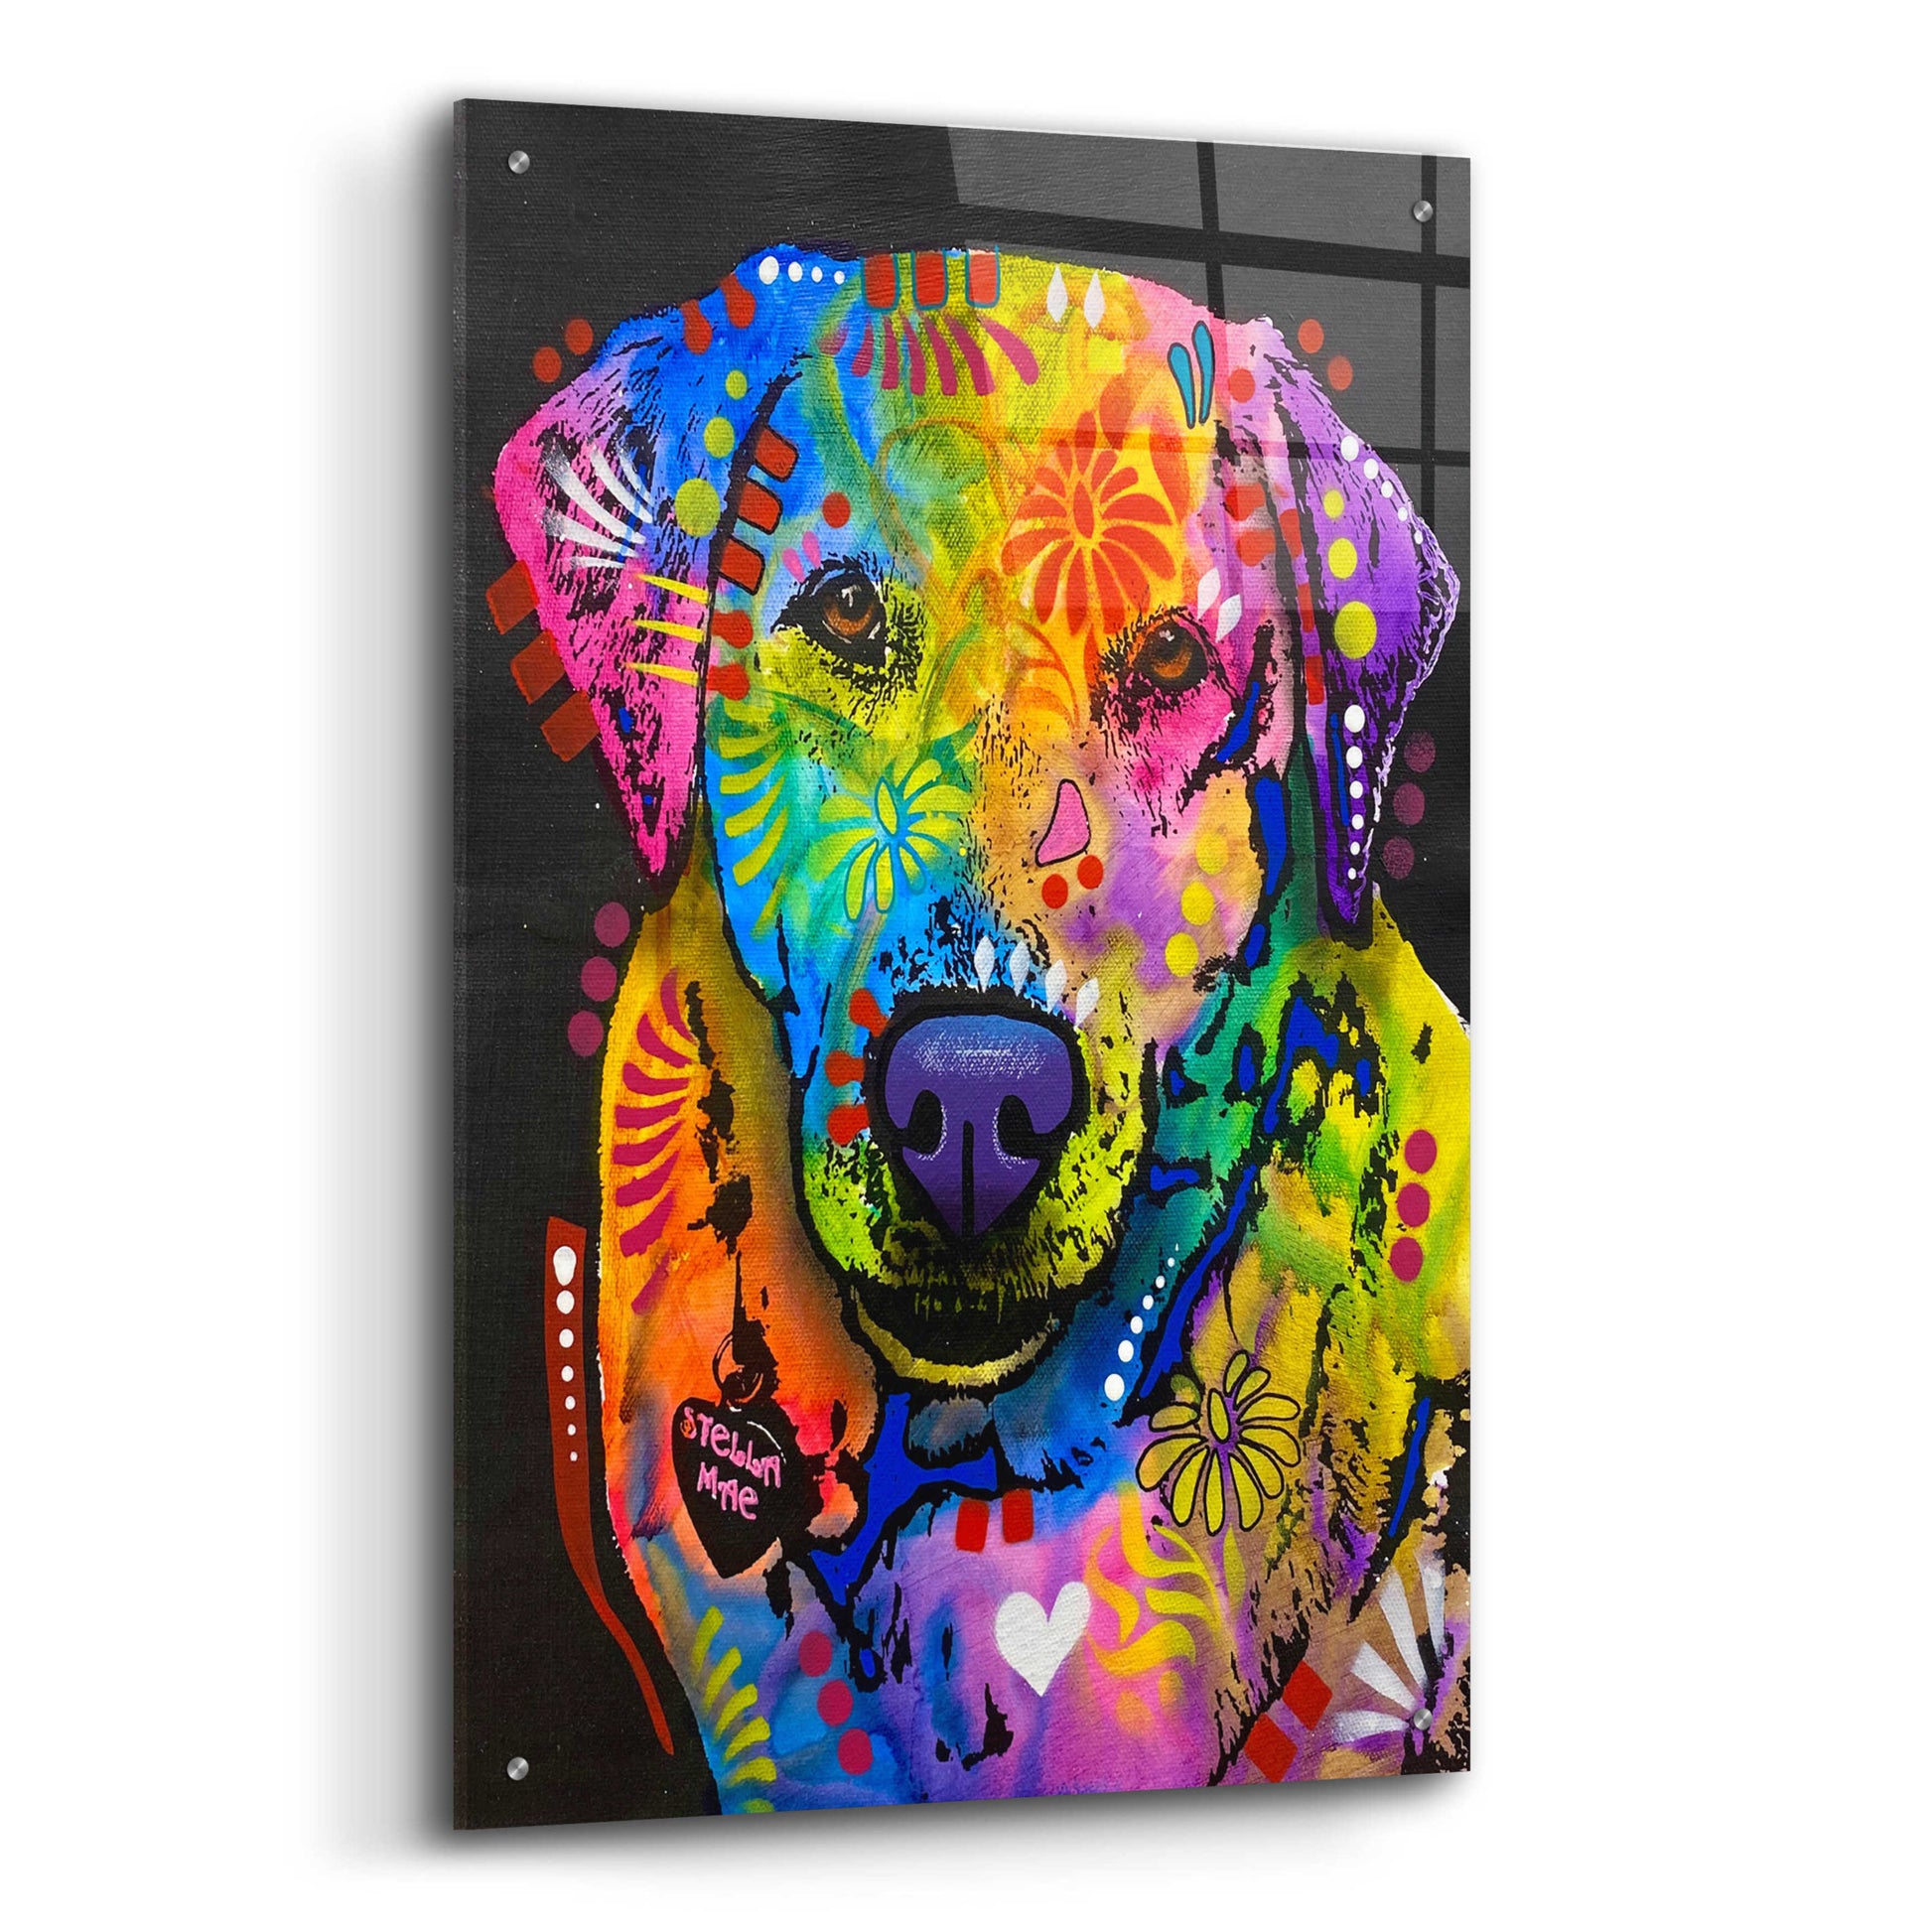 Epic Art 'Don't Do A Thing But Run Around' by Dean Russo, Acrylic Glass Wall Art,24x36